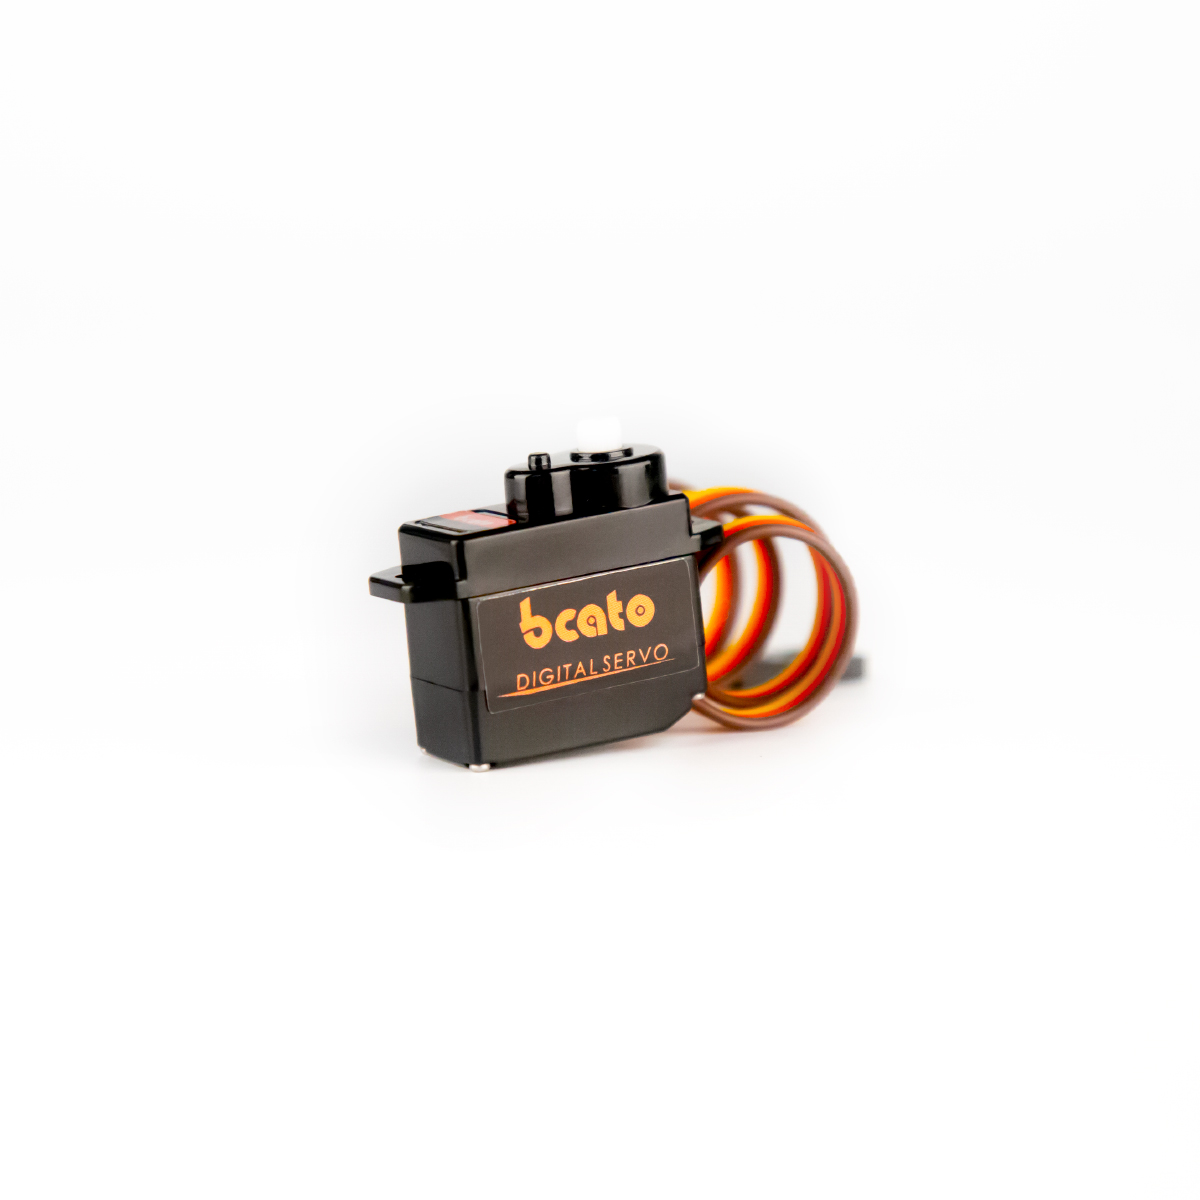 Bcato S08D 9g Plastic Gear Micro Digital Servo for RC Helicopter Airplane RC Quadcopter